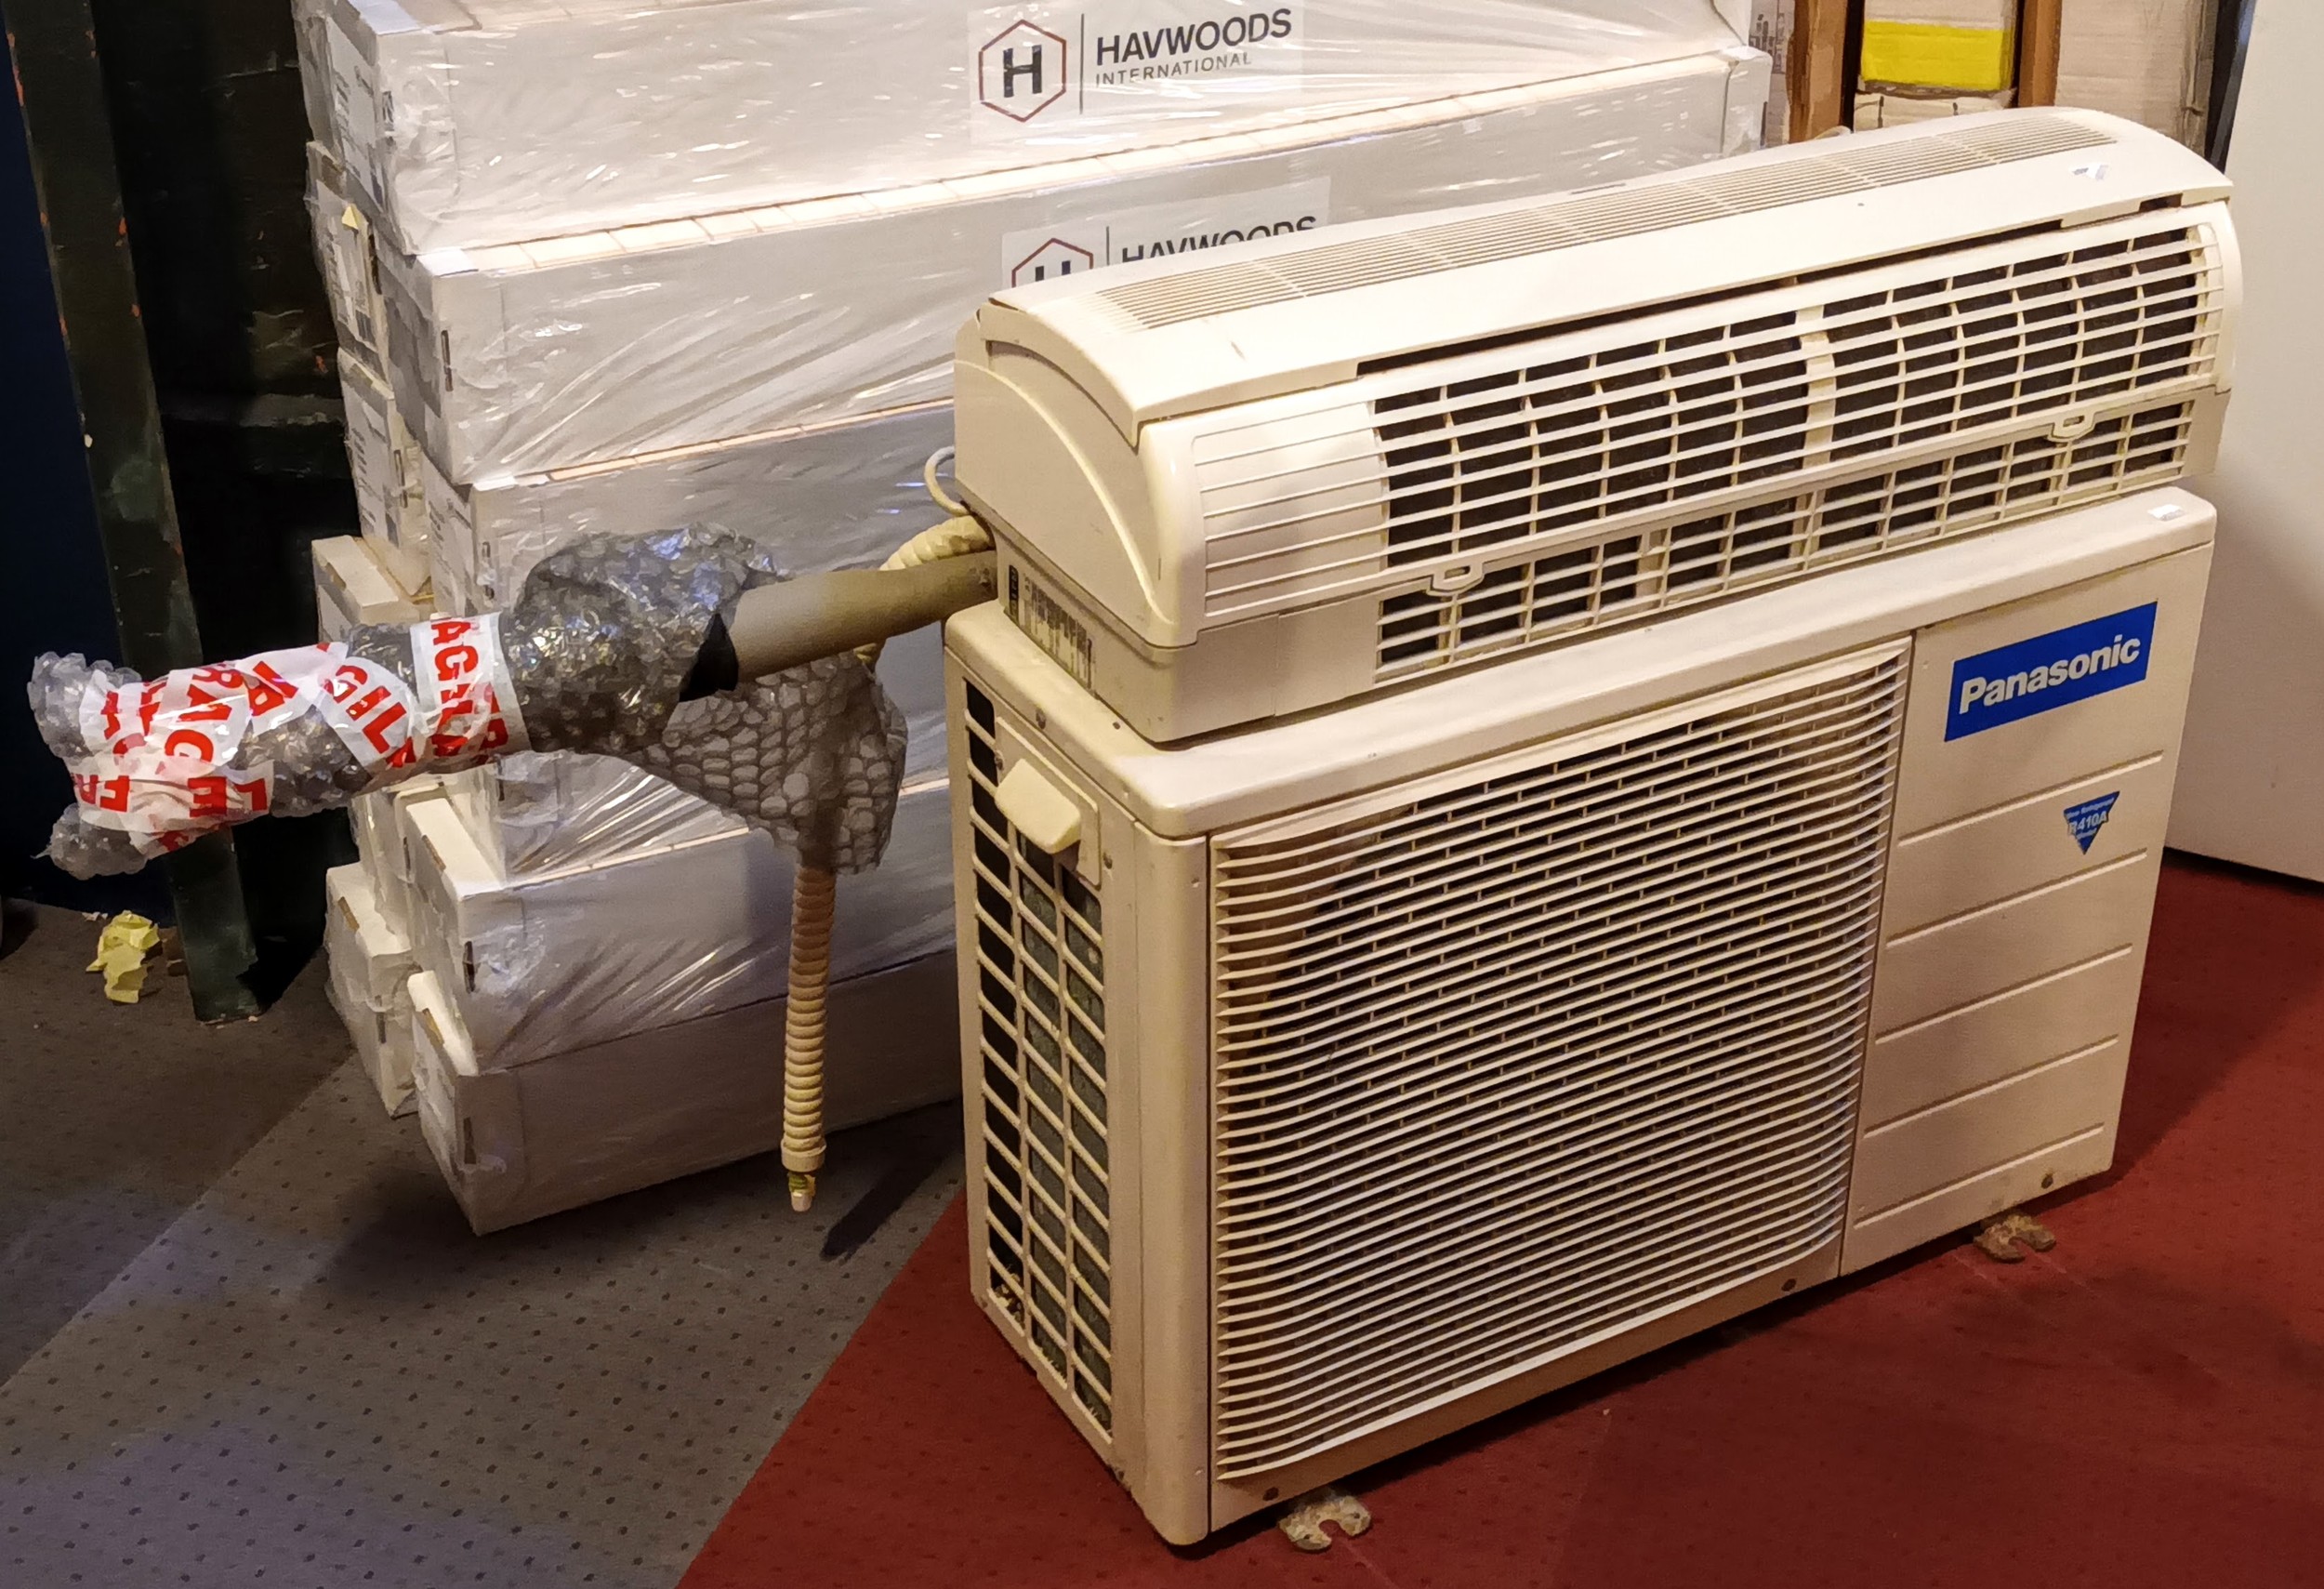 A Panasonic air conditioning unit R410A, untested, 80cm x 54cm x 30cm, together with a Panasonic Ion